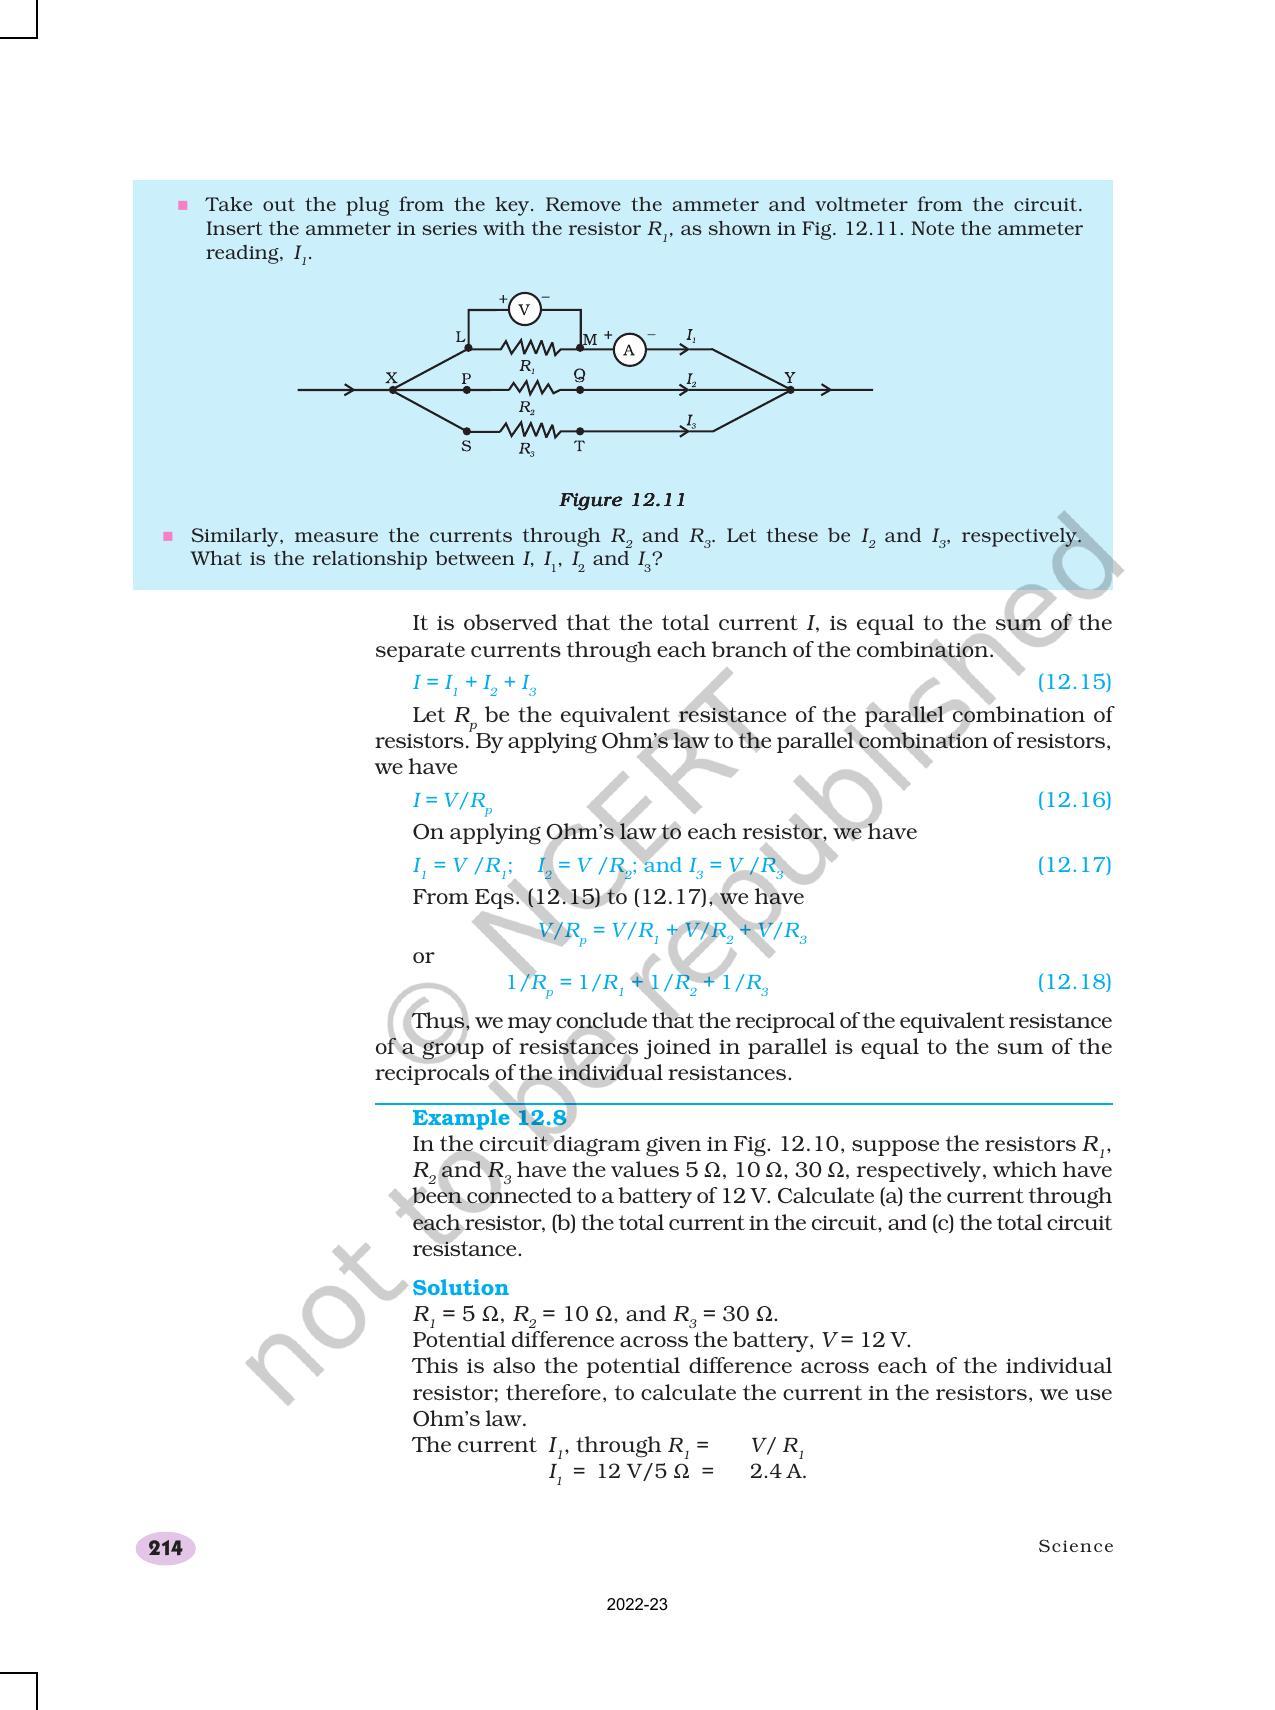 NCERT Book for Class 10 Science Chapter 12 Electricity - Page 16